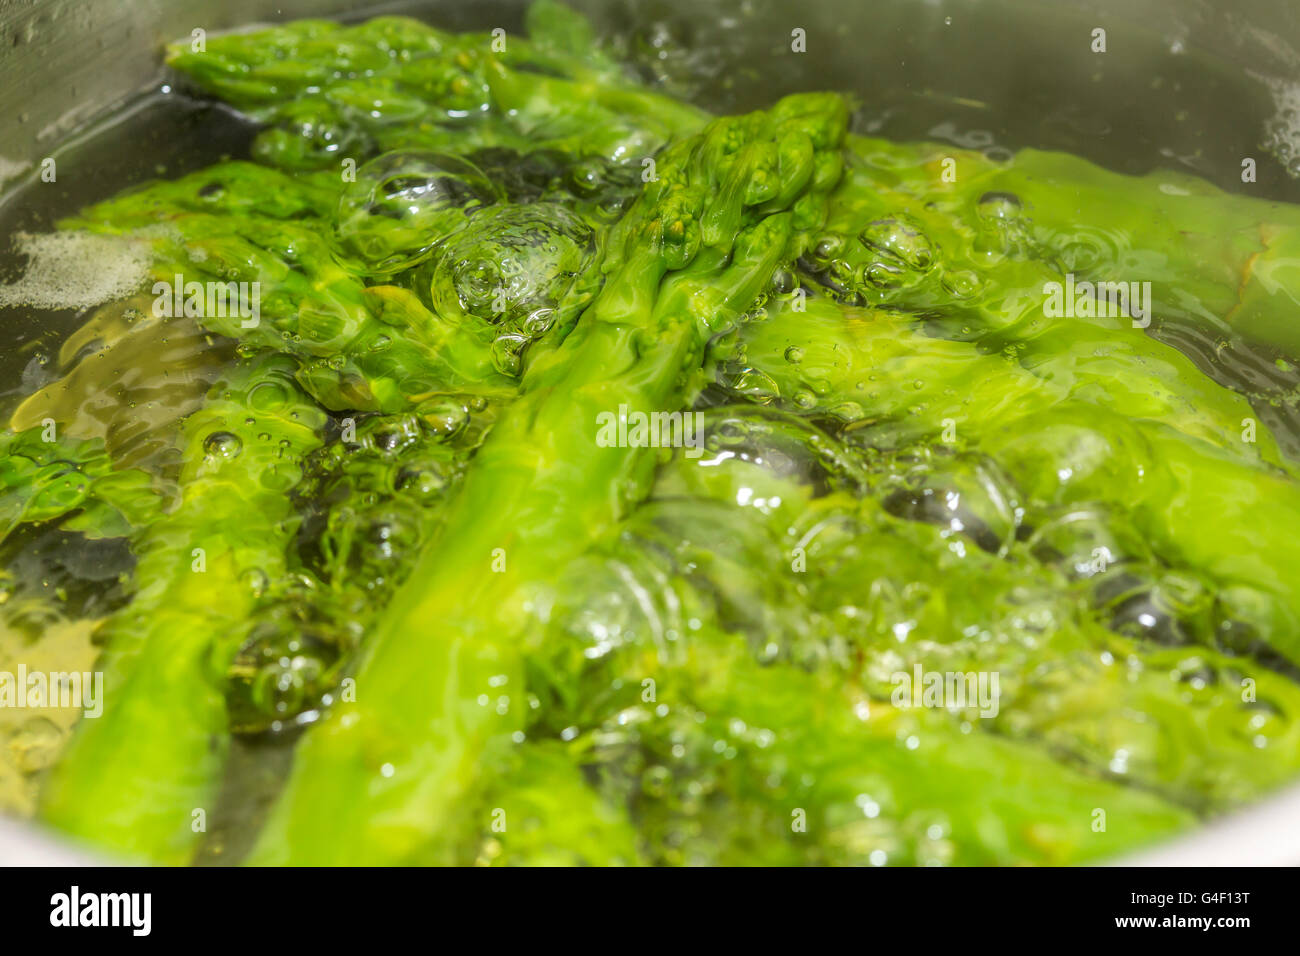 Green asparagus is cooking, boiling, simmering, in a cooking pot, Stock Photo